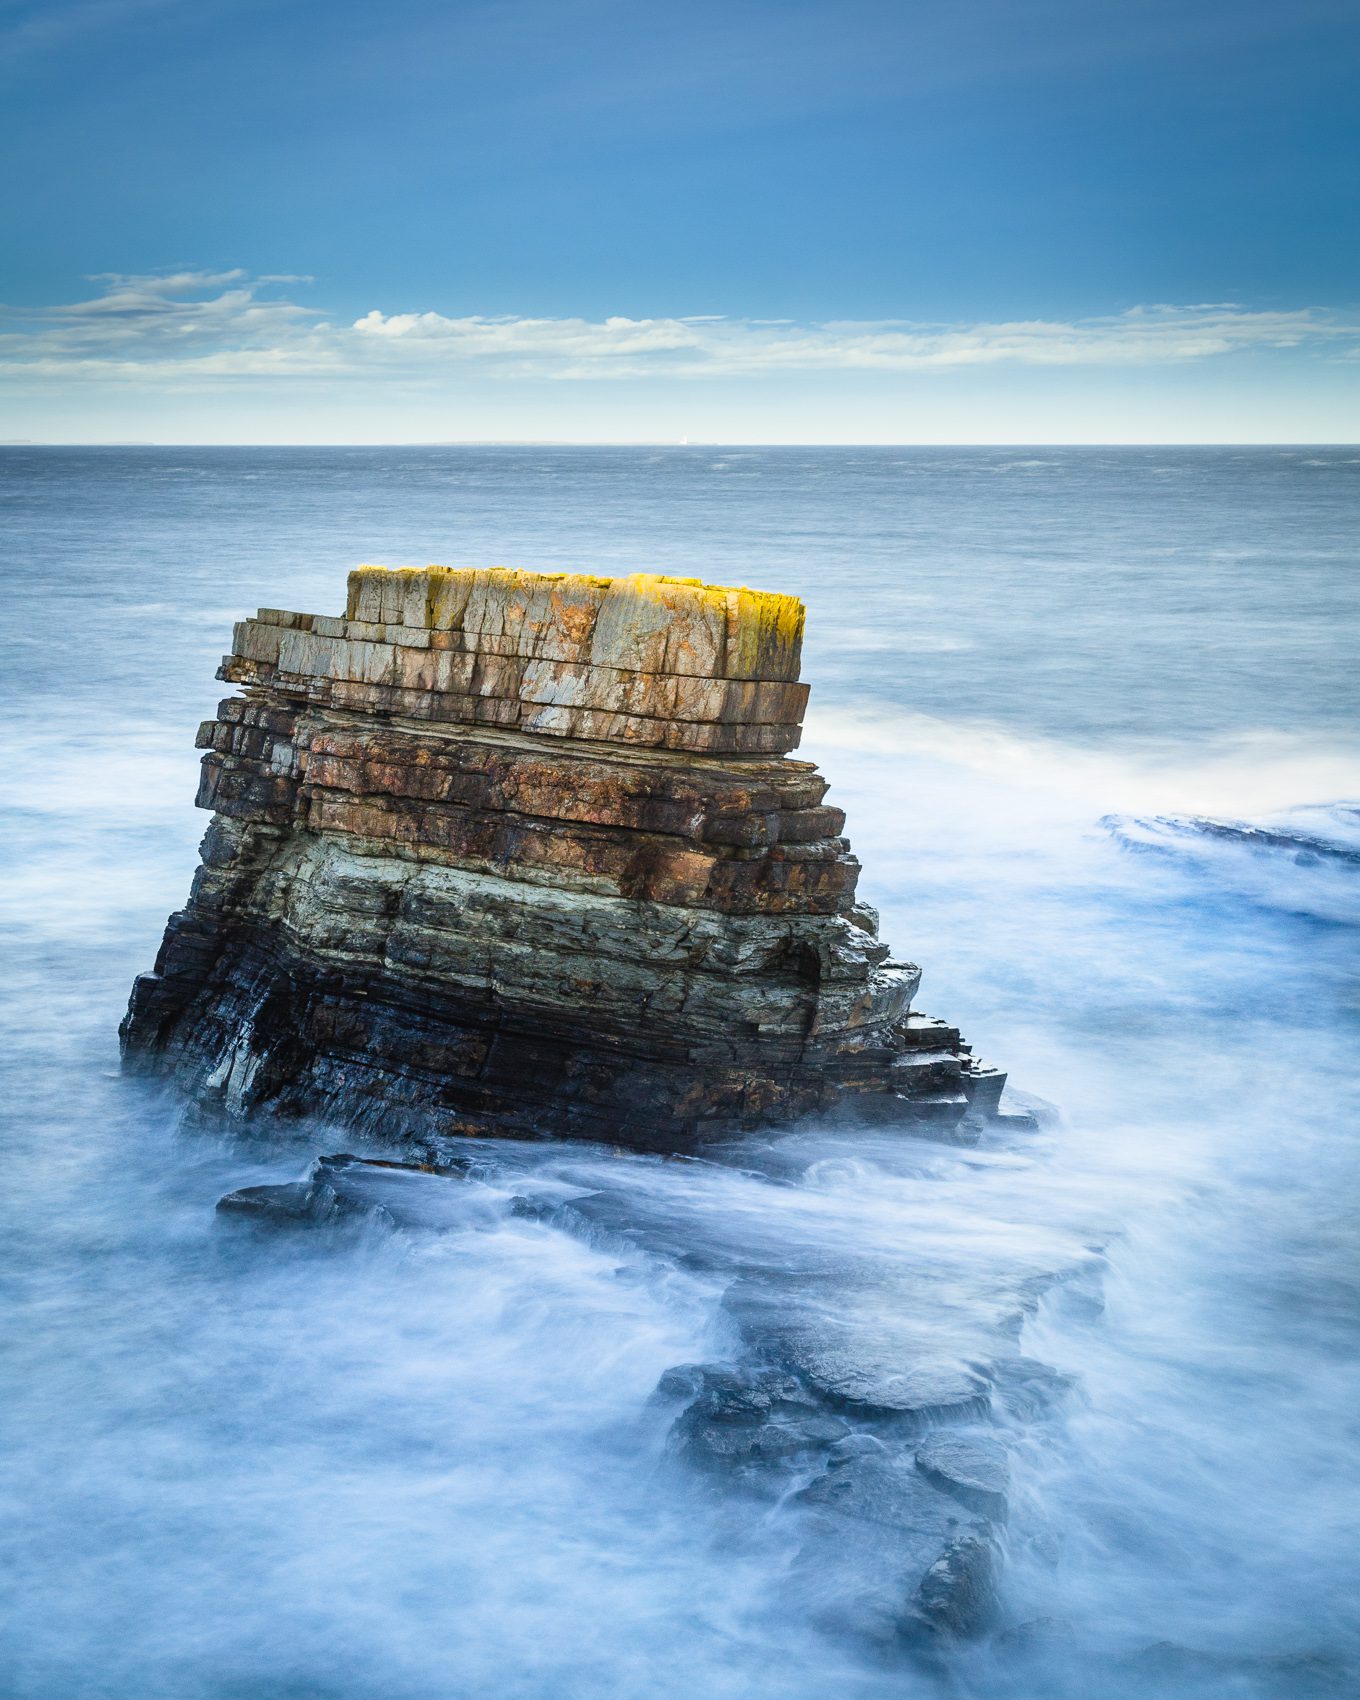 Rough seas around a sea stack at Deerness, Orkney Islands. OR020